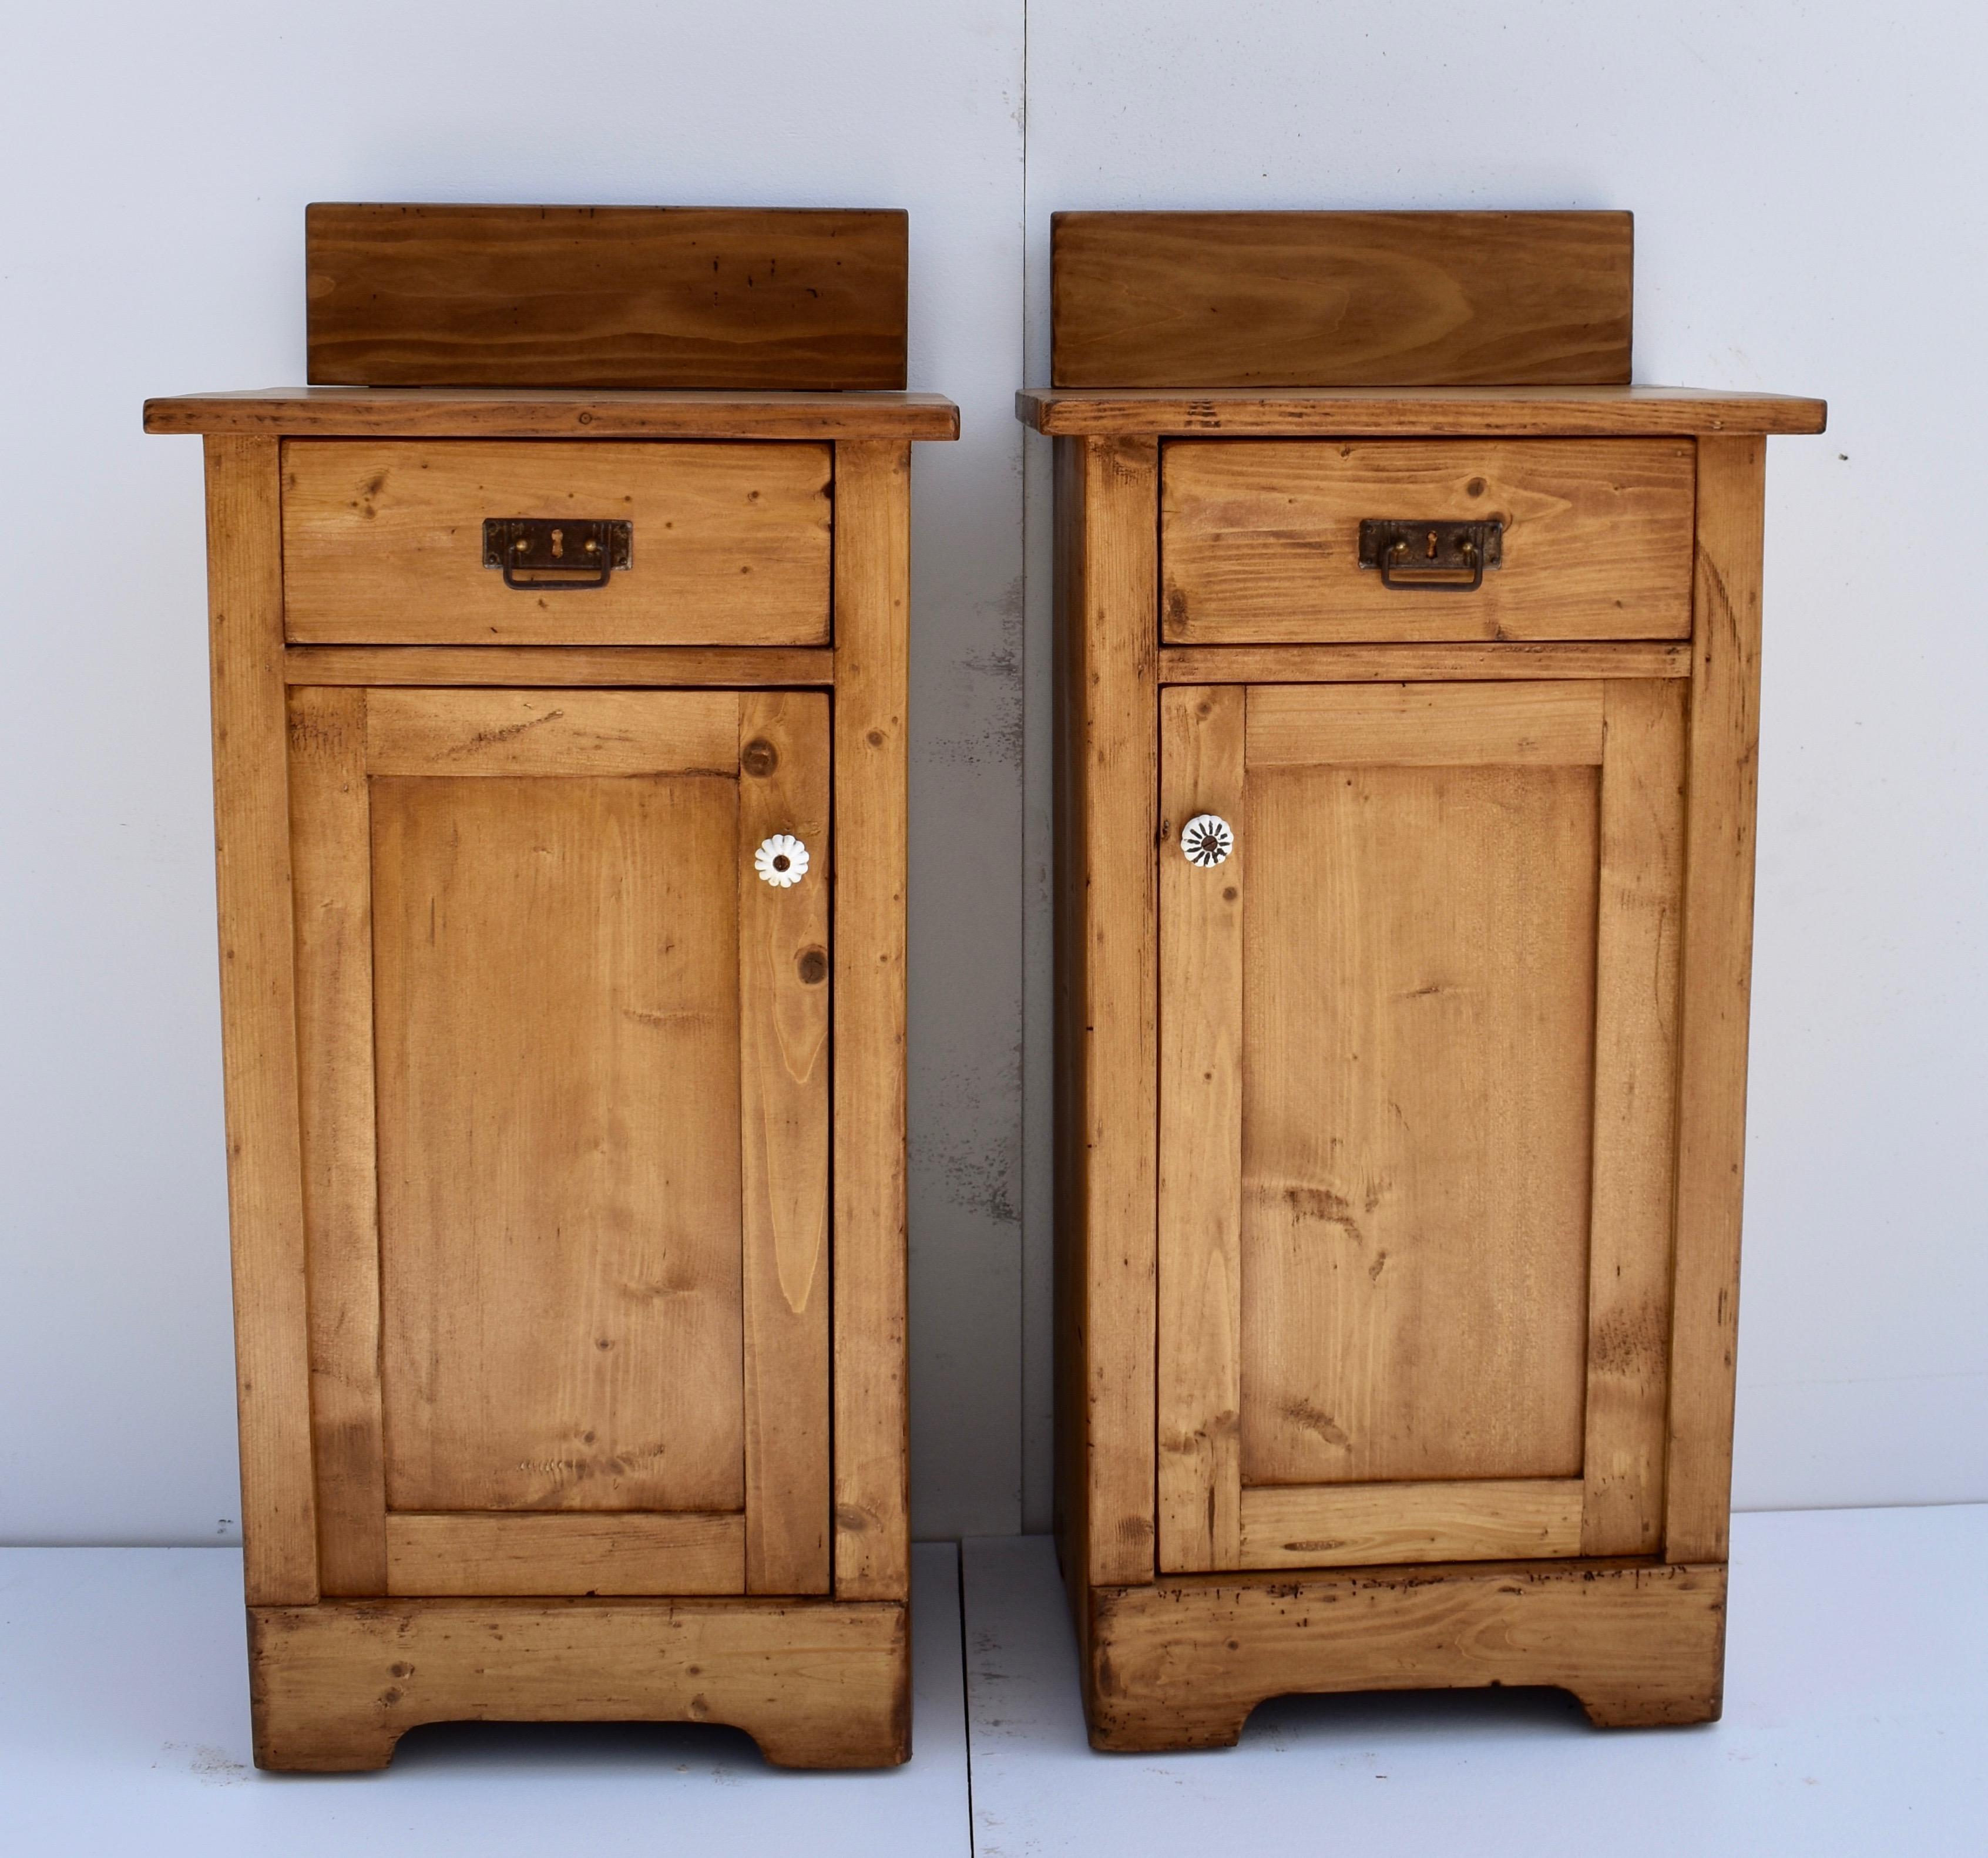 This pair of polished pine nightstands is in the usual one door, one-drawer configuration. The straight-topped removable splashback is finished in a contrasting rugger brown wax. The drawer is of handcut dovetailed construction and the paneled door